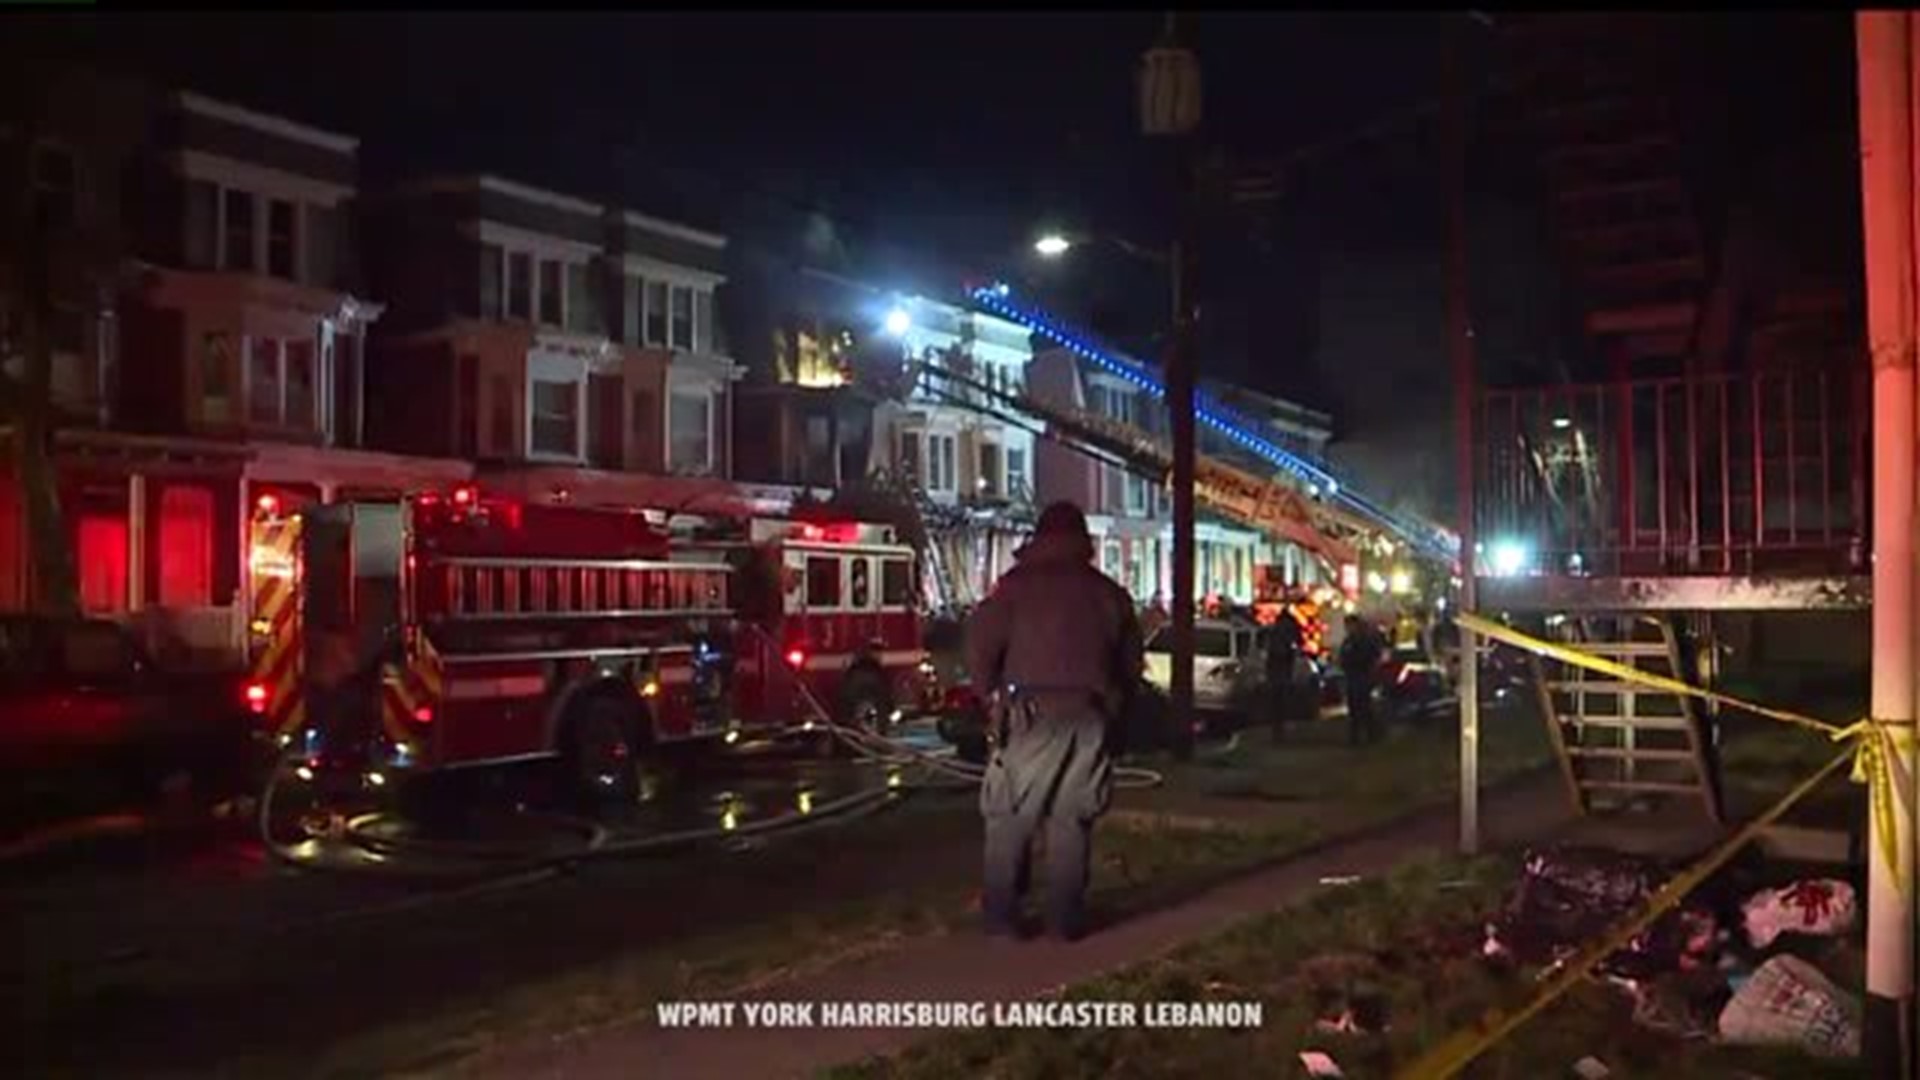 3 taken to hospital after fire in Harrisburg